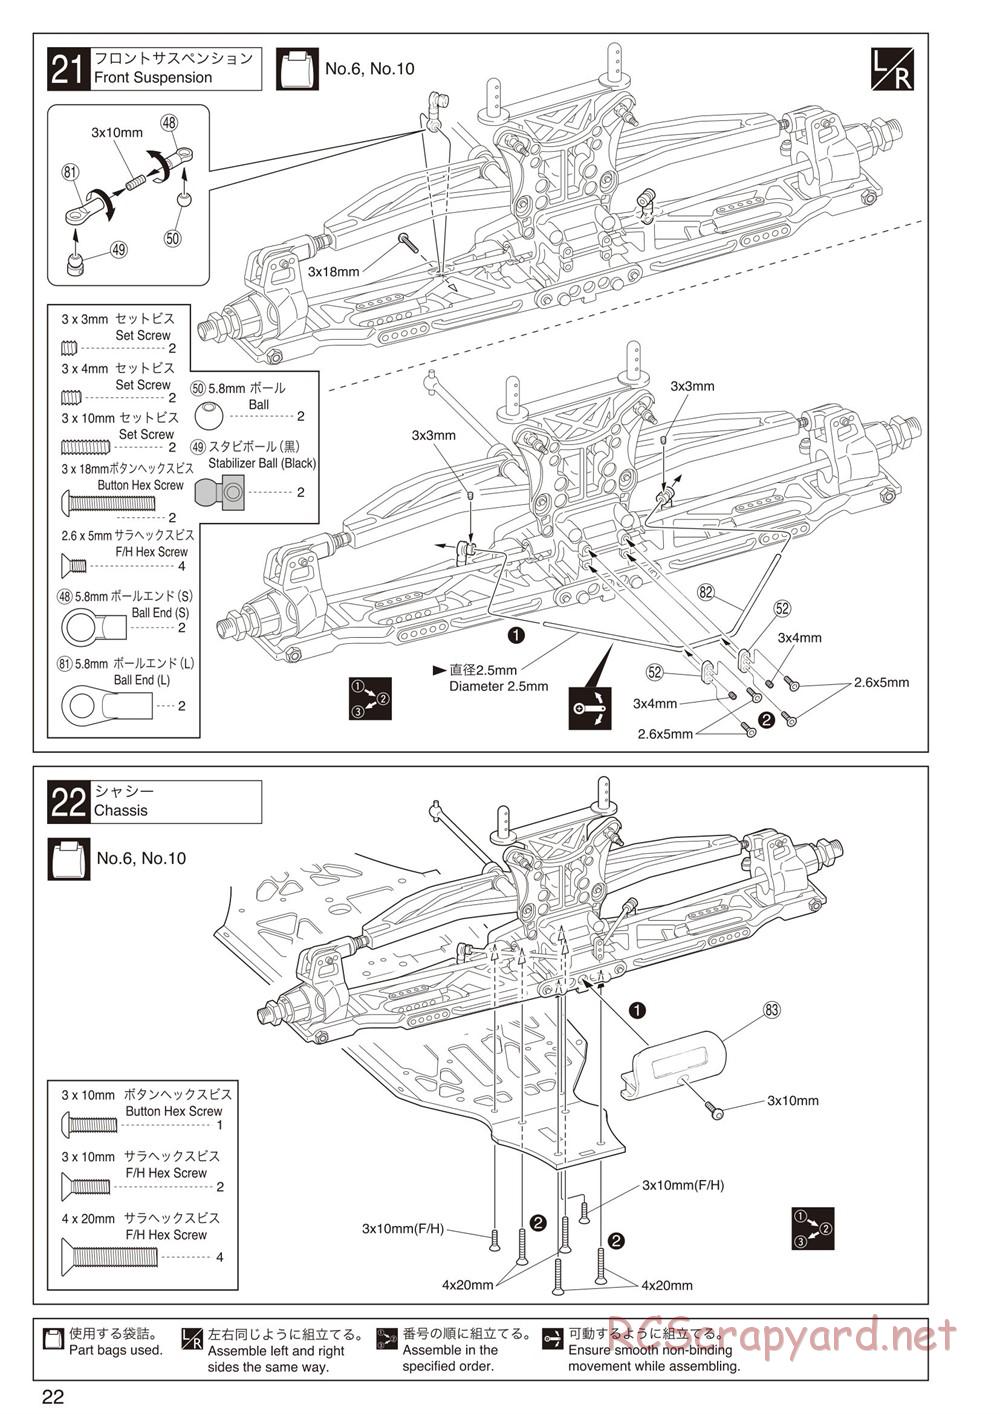 Kyosho - Inferno ST-RR Evo.2 - Manual - Page 26